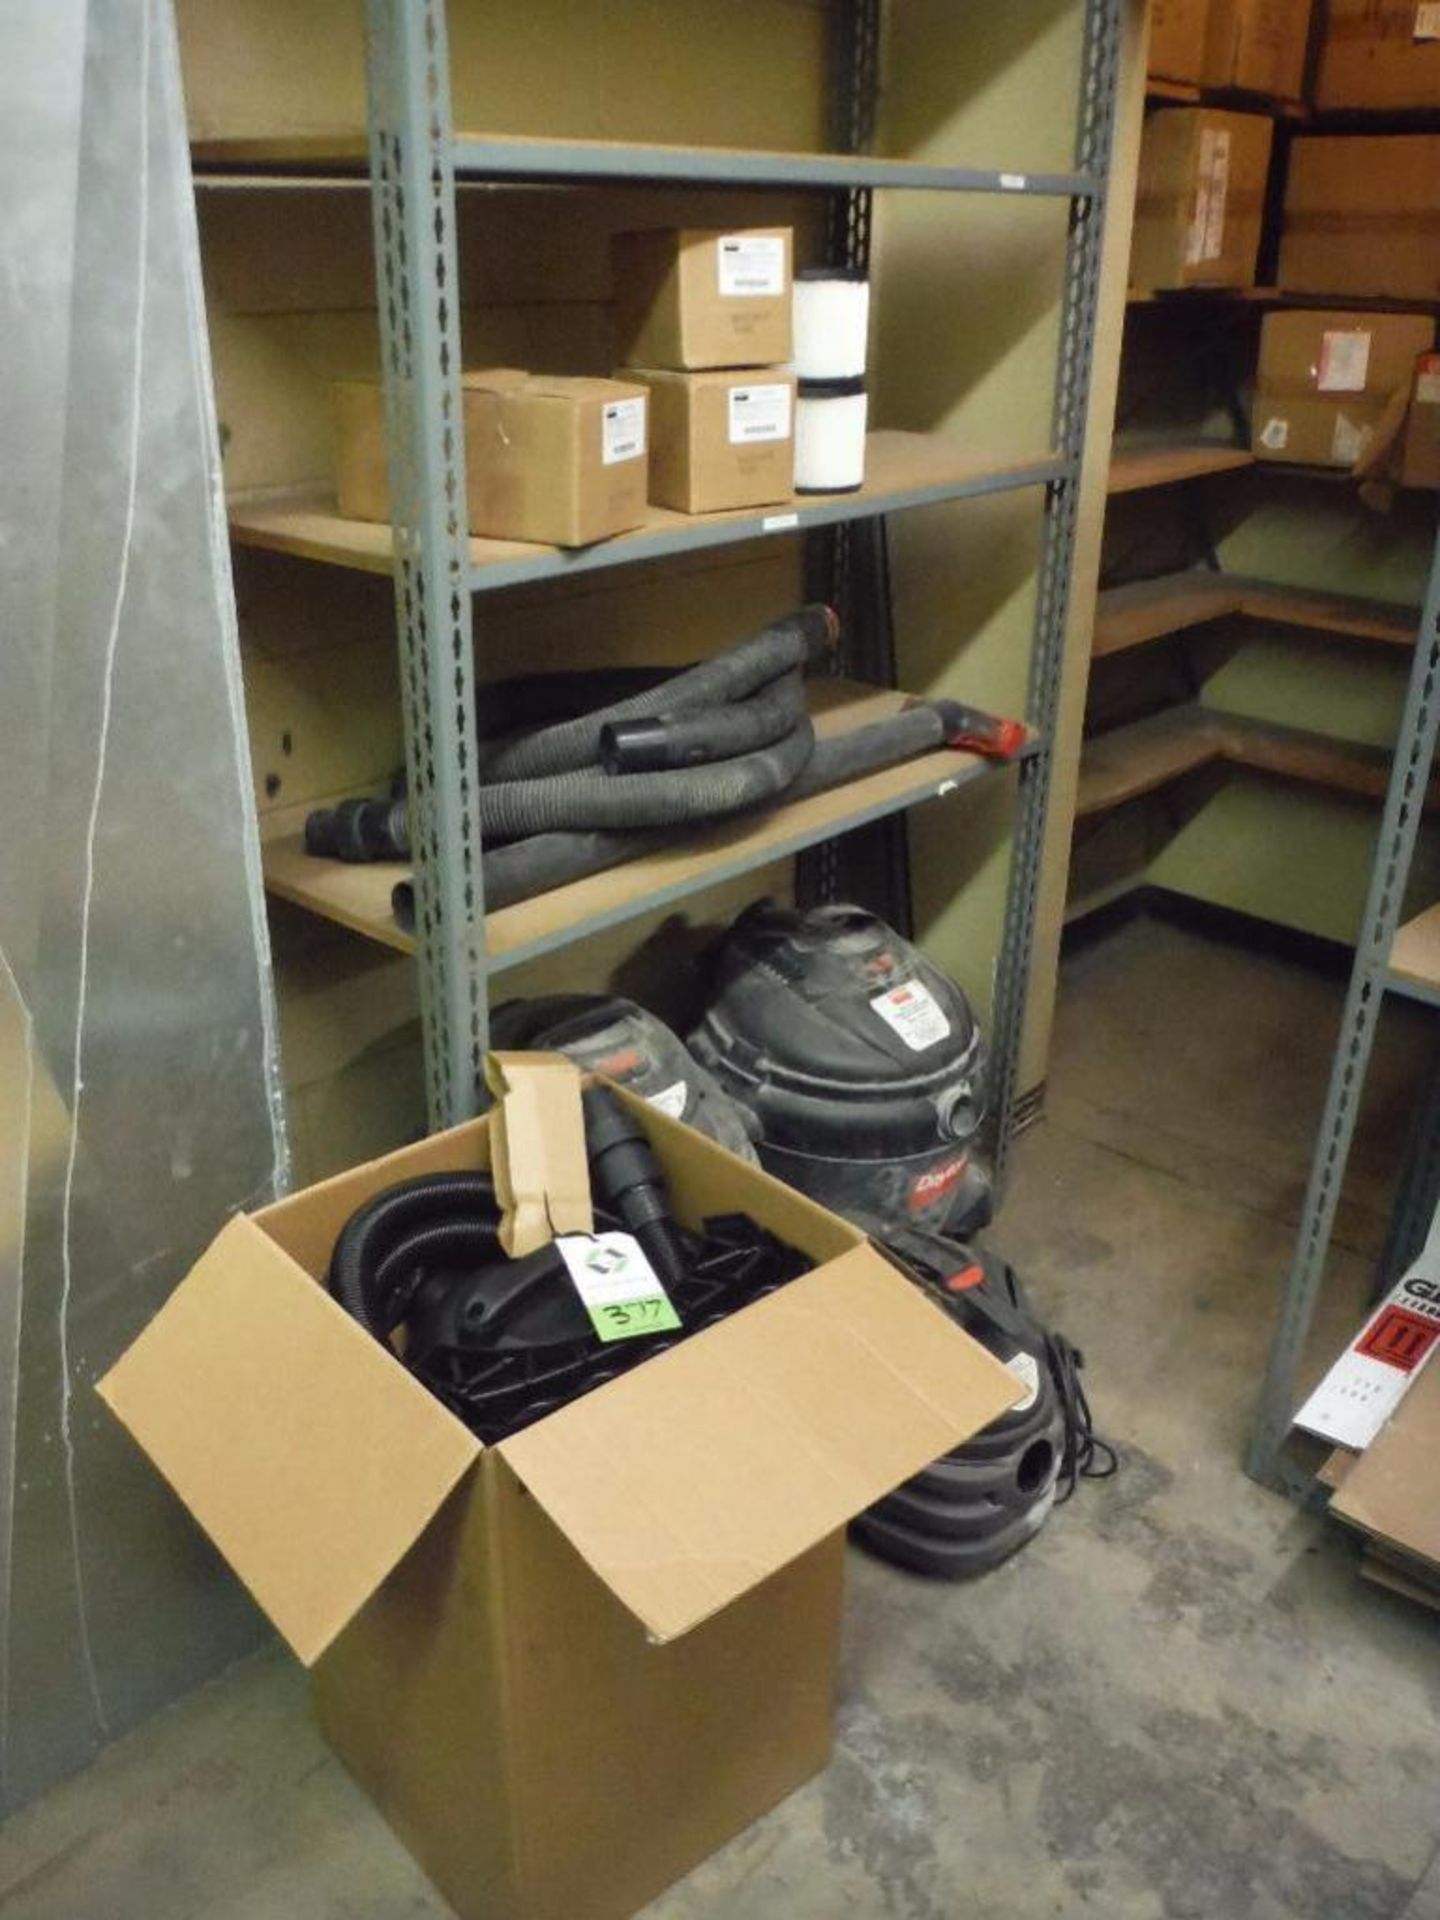 Contents of 1 sections of shelving, new in box Dayton shop vac, multiple used shop vacs ** Rigging